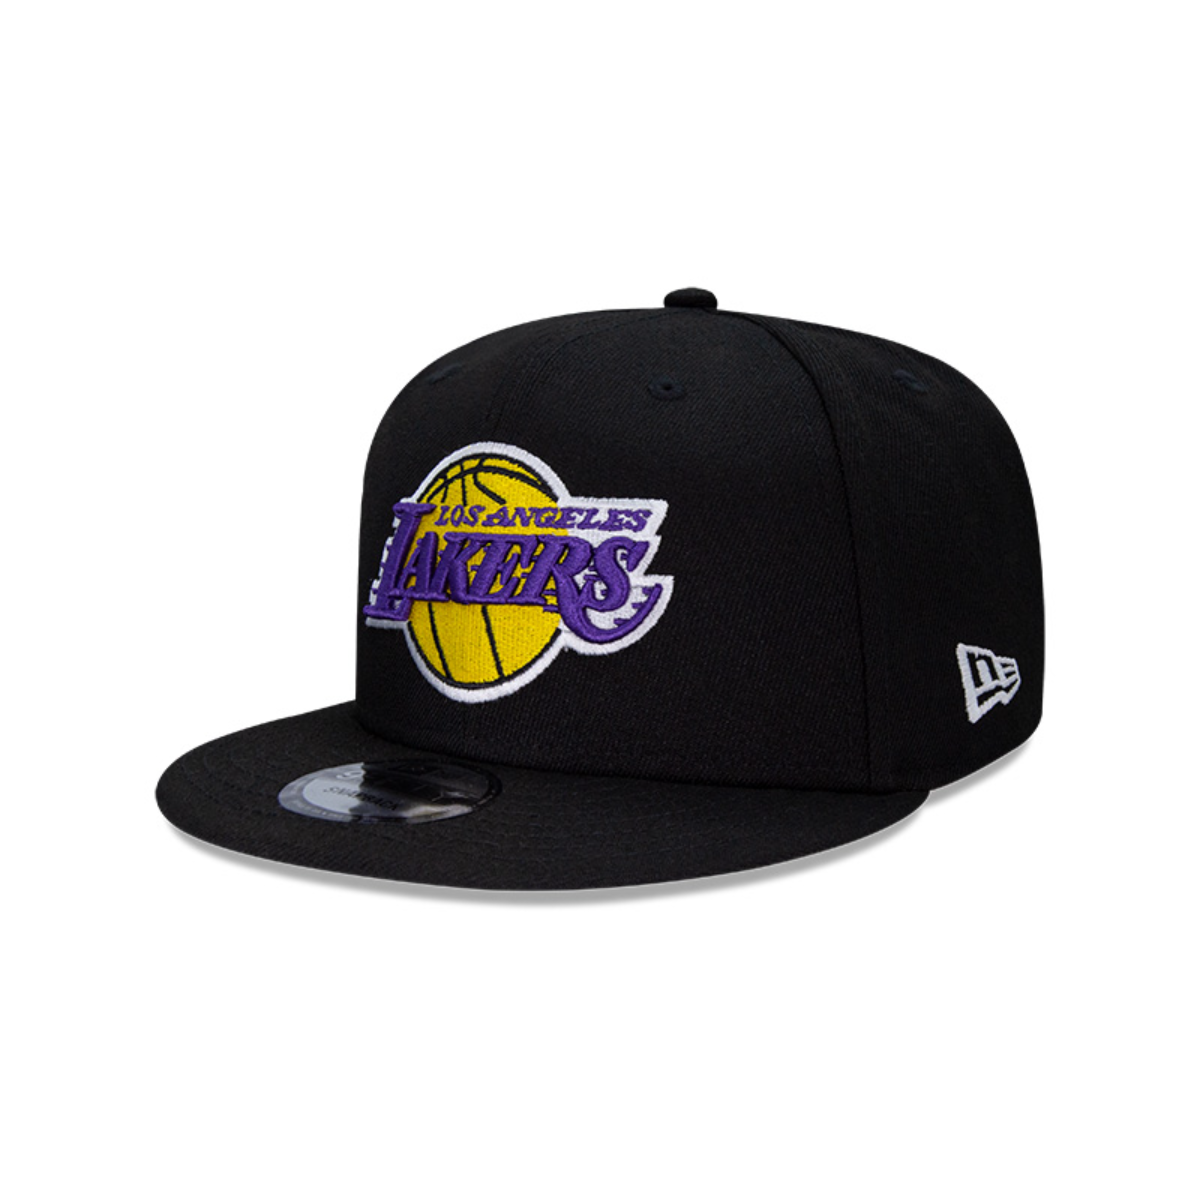 Gorra New Era Los Angeles Lakers 9FIFTY | Outdoor Adventure Colombia